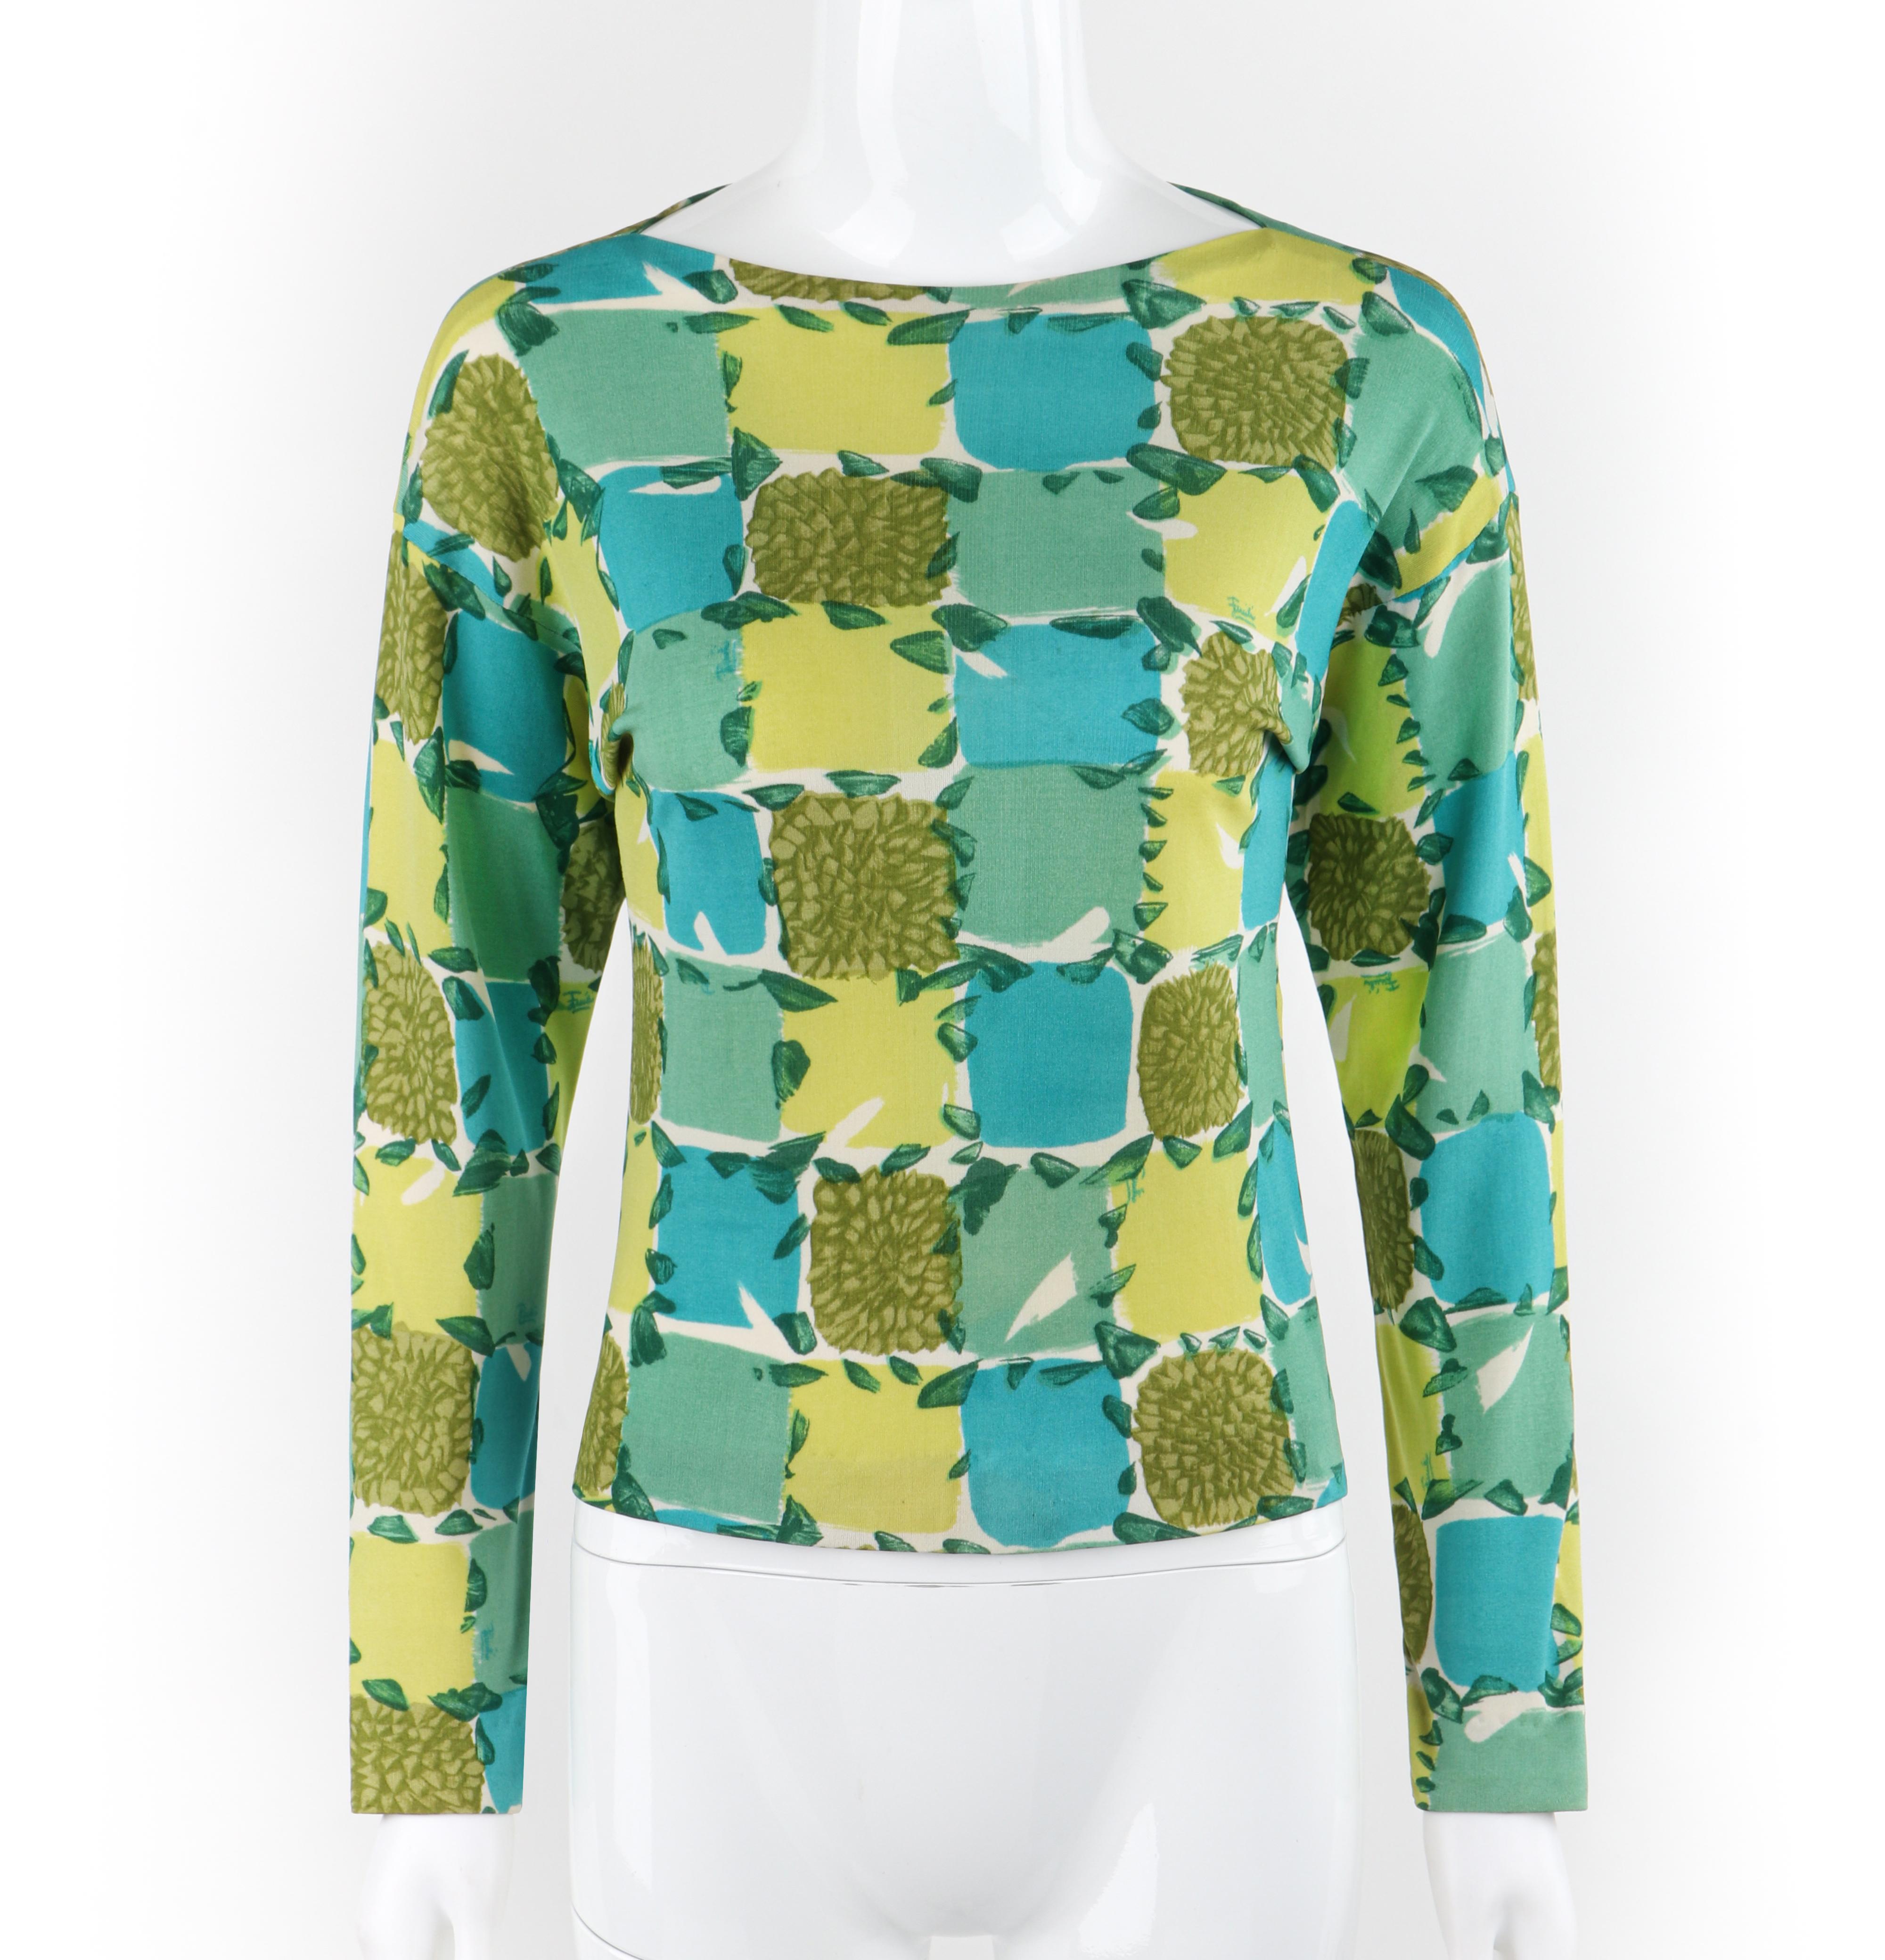 EMILIO PUCCI c.1956 Blue Yellow Green Abstract Floral Check Print Silk Sweater

Brand / Manufacturer: Emilio Pucci
Circa: 1956
Designer: Emilio Pucci 
Style: Long sleeve sweater
Color(s): Shades of white, blue, green, yellow
Lined: No
Marked Fabric